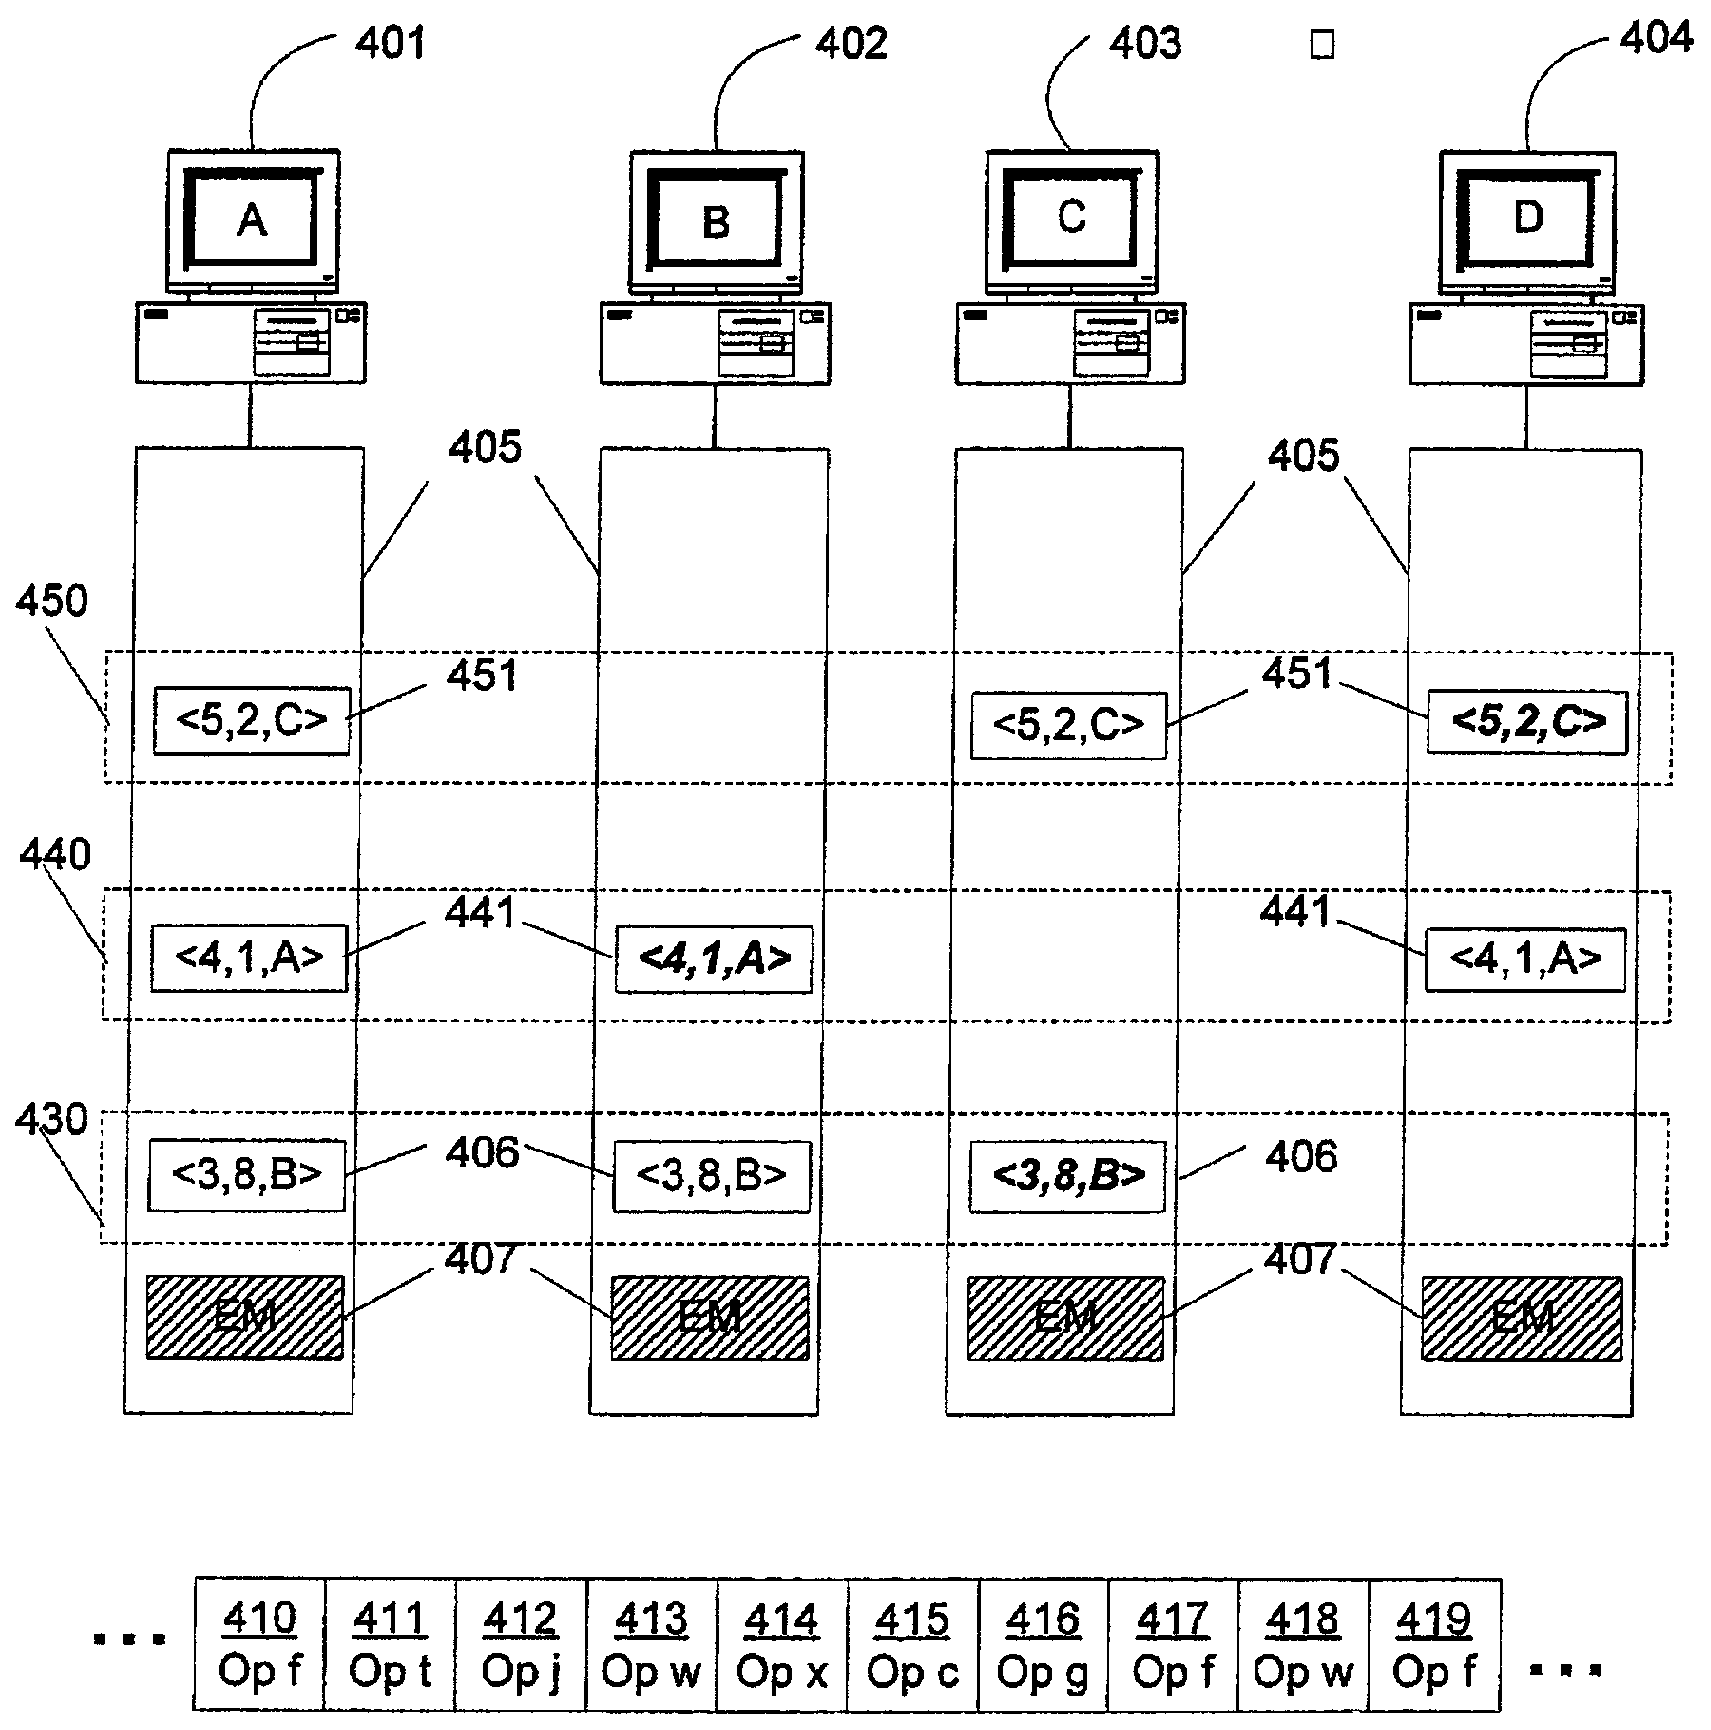 Efficient changing of replica sets in distributed fault-tolerant computing system